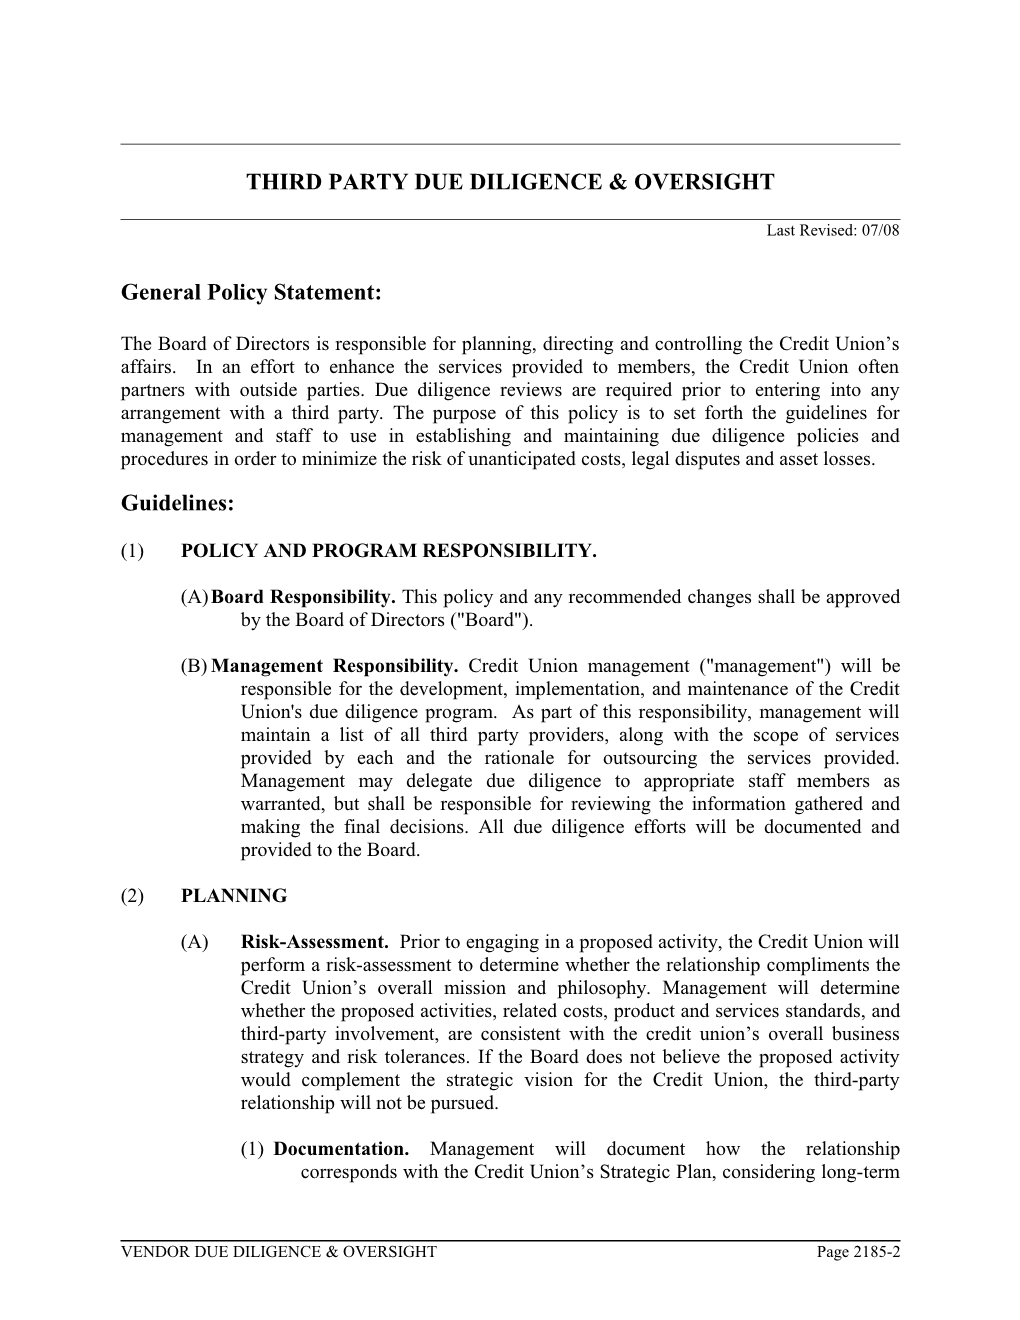 Third Party Due Diligence & Oversight